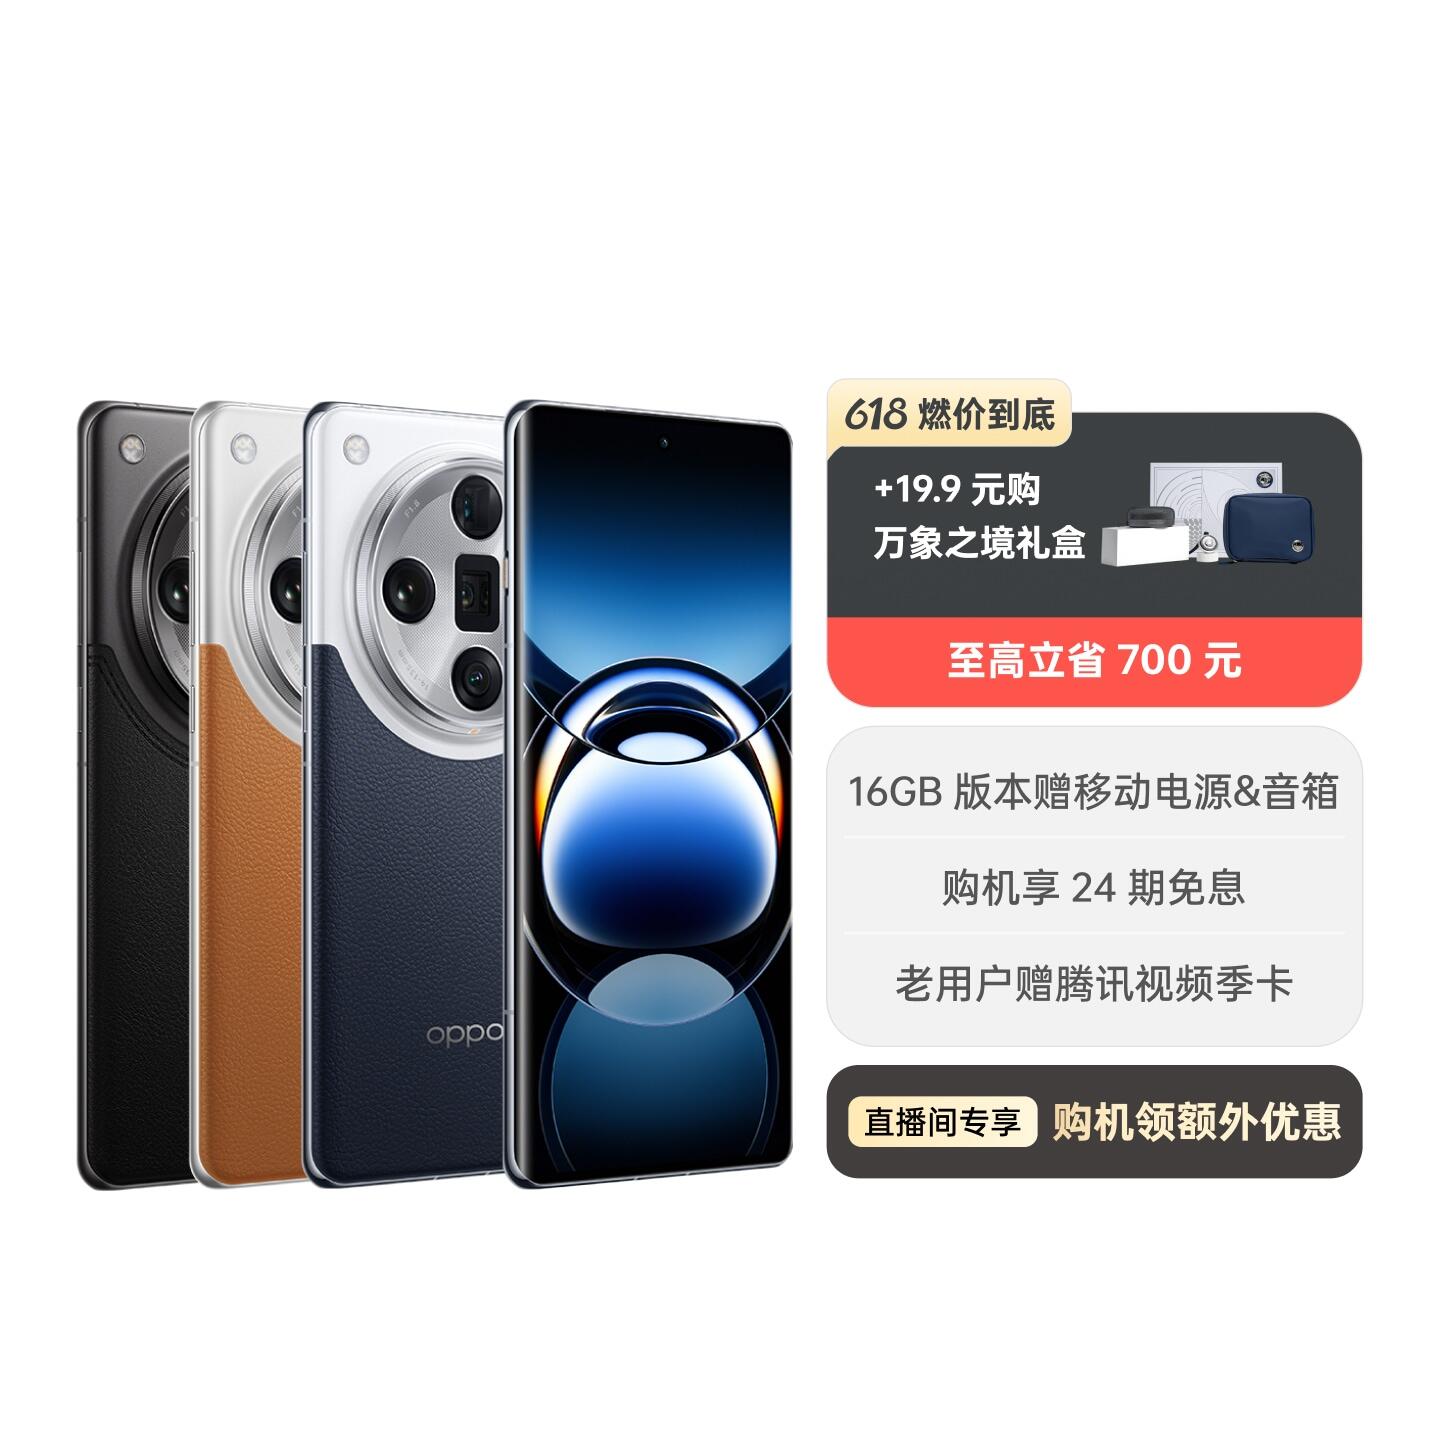 OPPOFindX7Ultra值得买吗？OPPOFindX7Ultra质量好吗